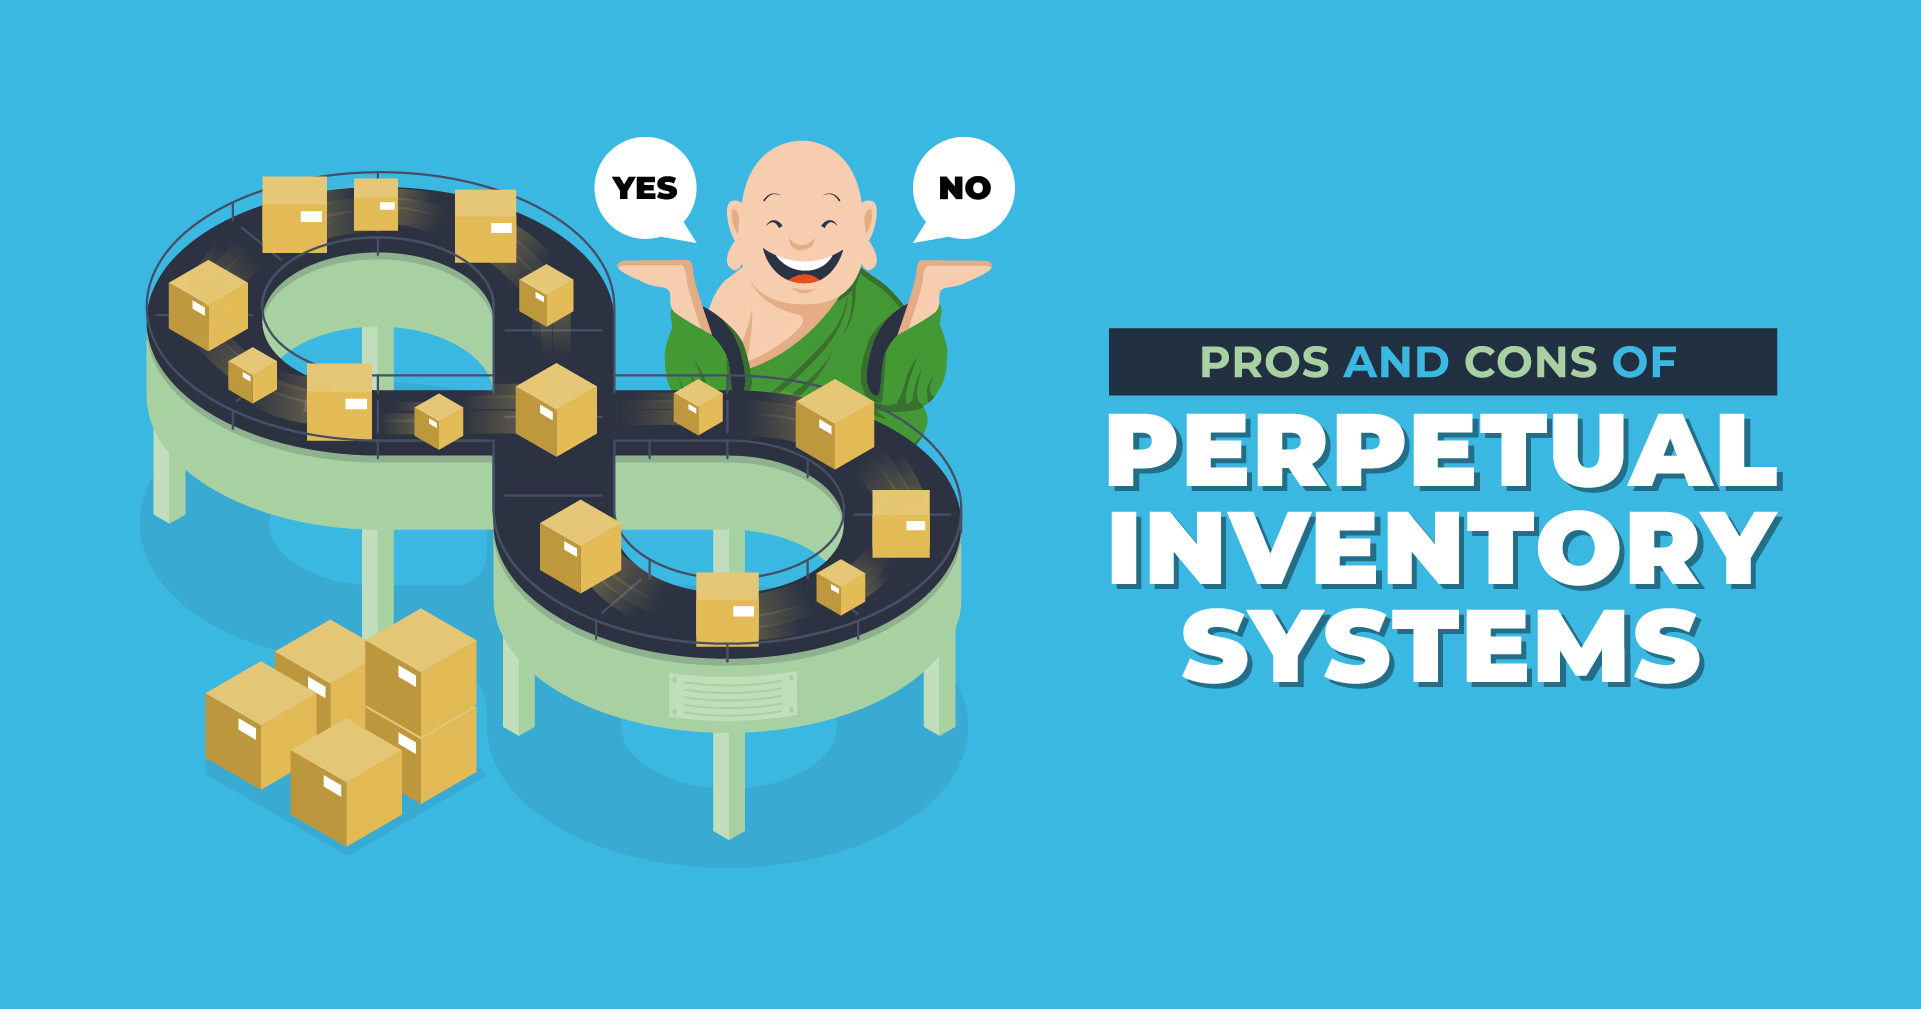 Pros and Cons of a Perpetual Inventory System